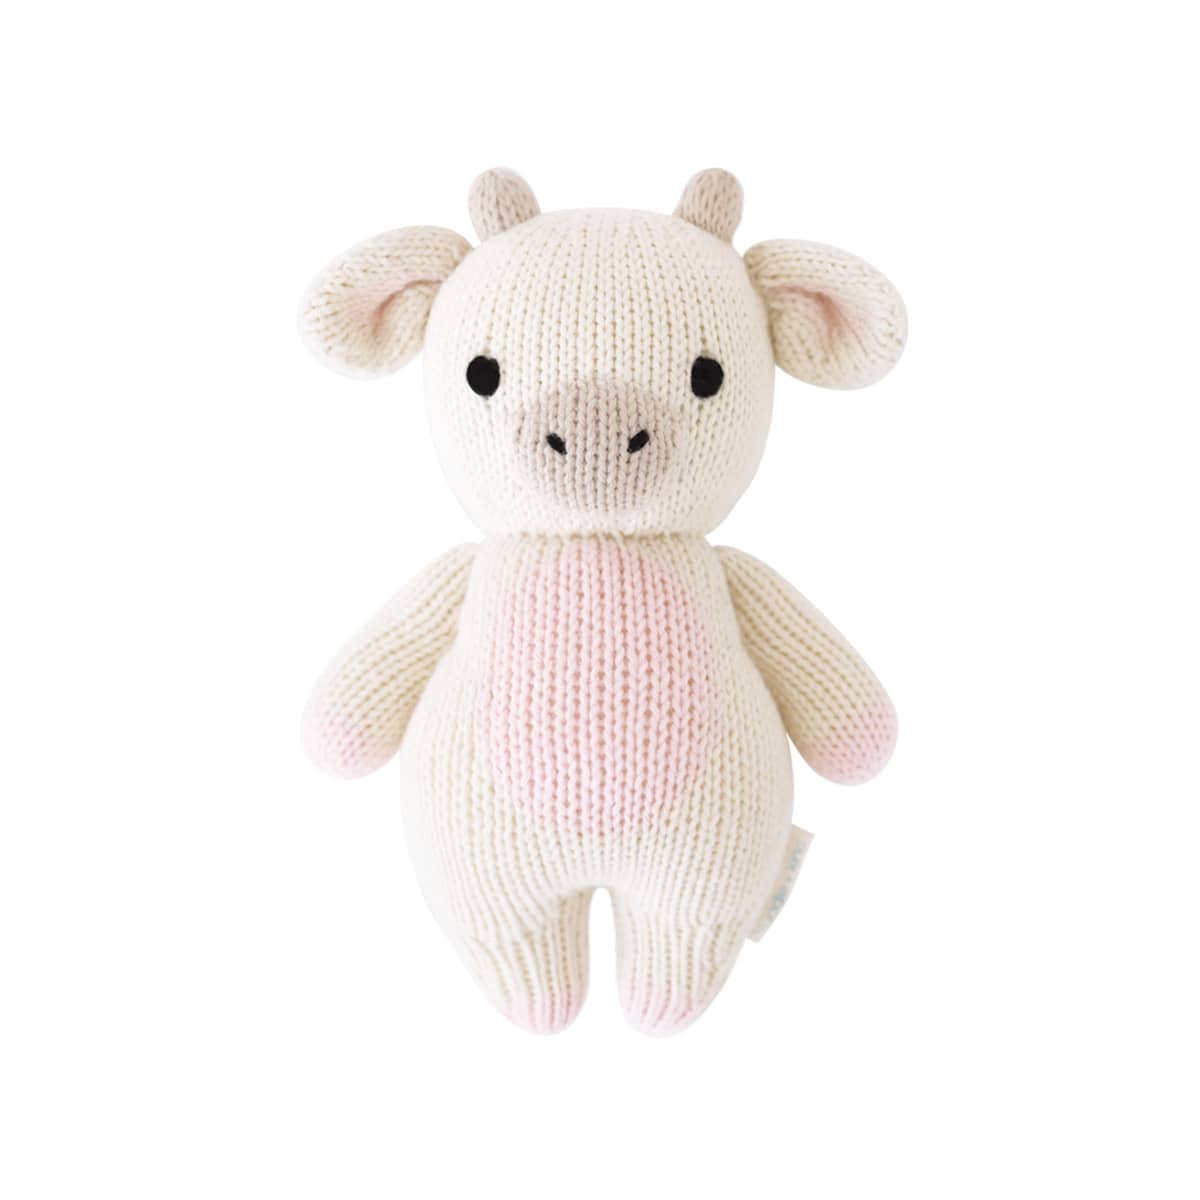 Cuddle + Kind Hand-Knit Doll - Baby Cow (Strawberry)